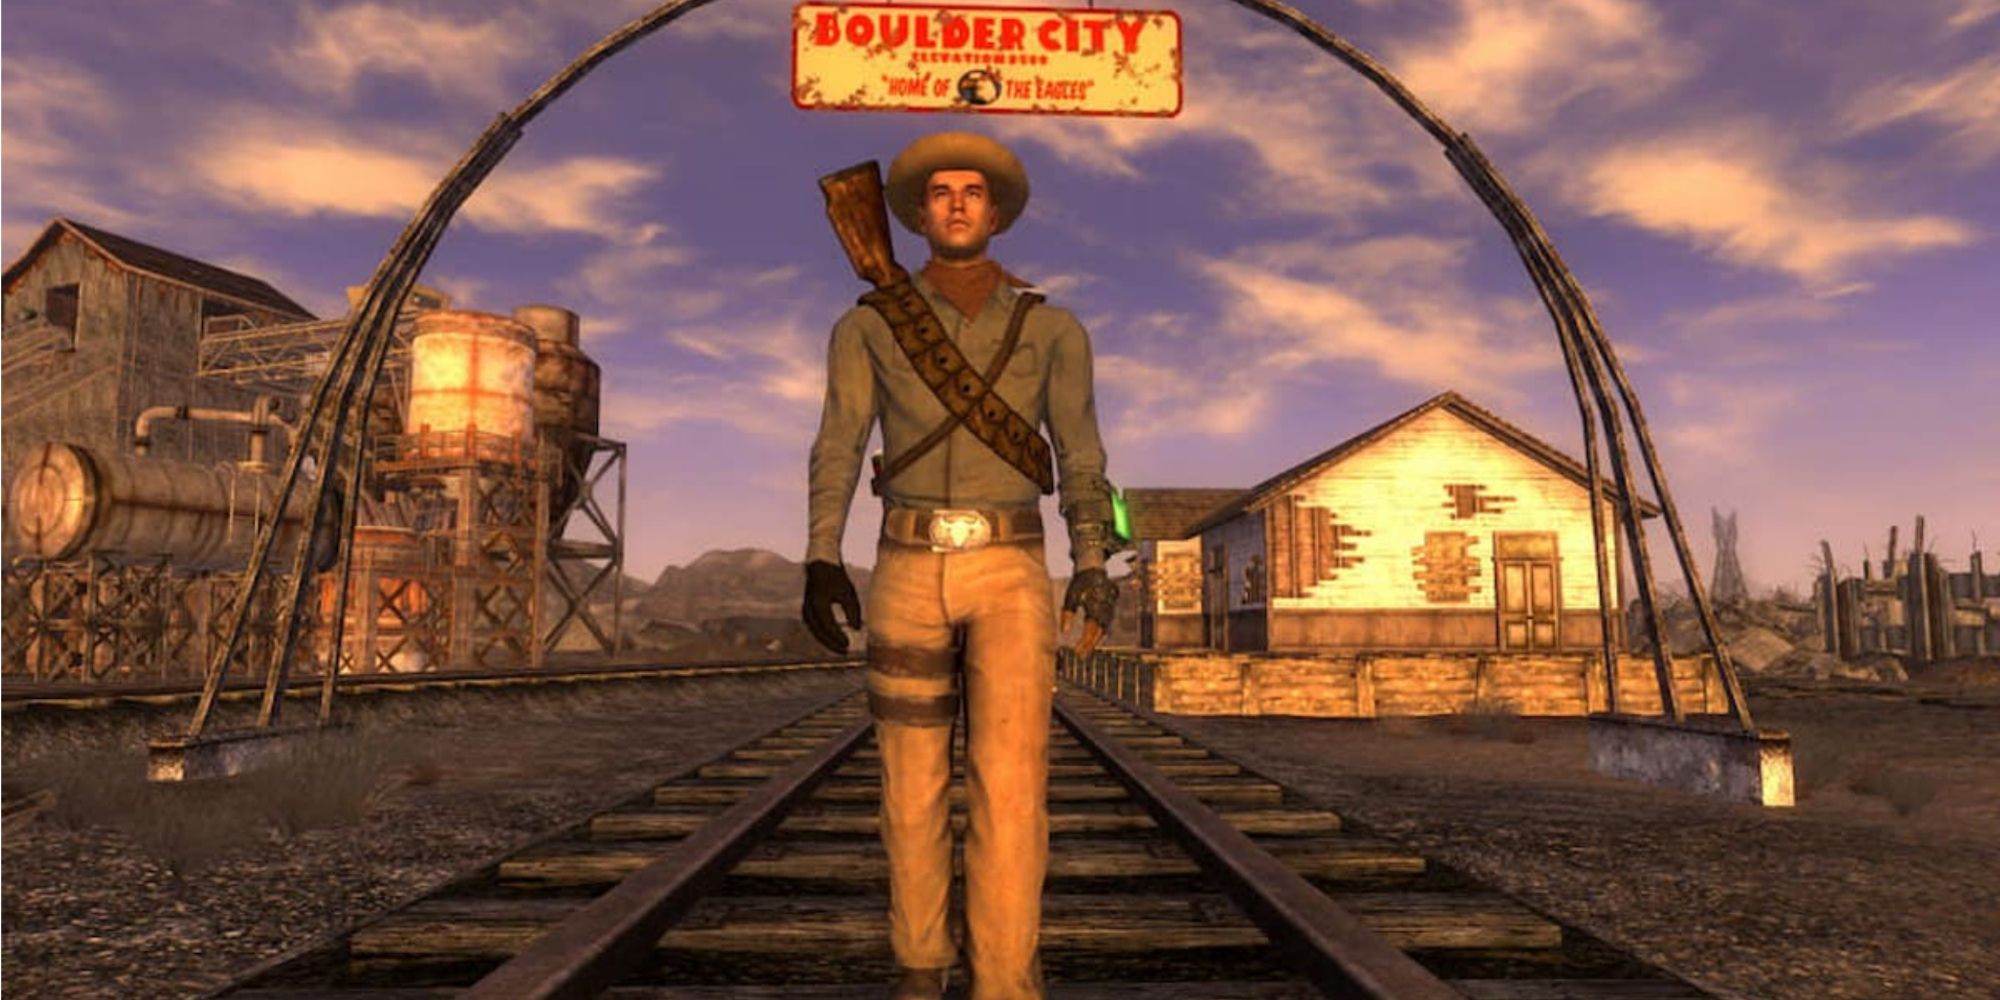 Fallout New Vegas is now considered the pinnacle of the Fallout series